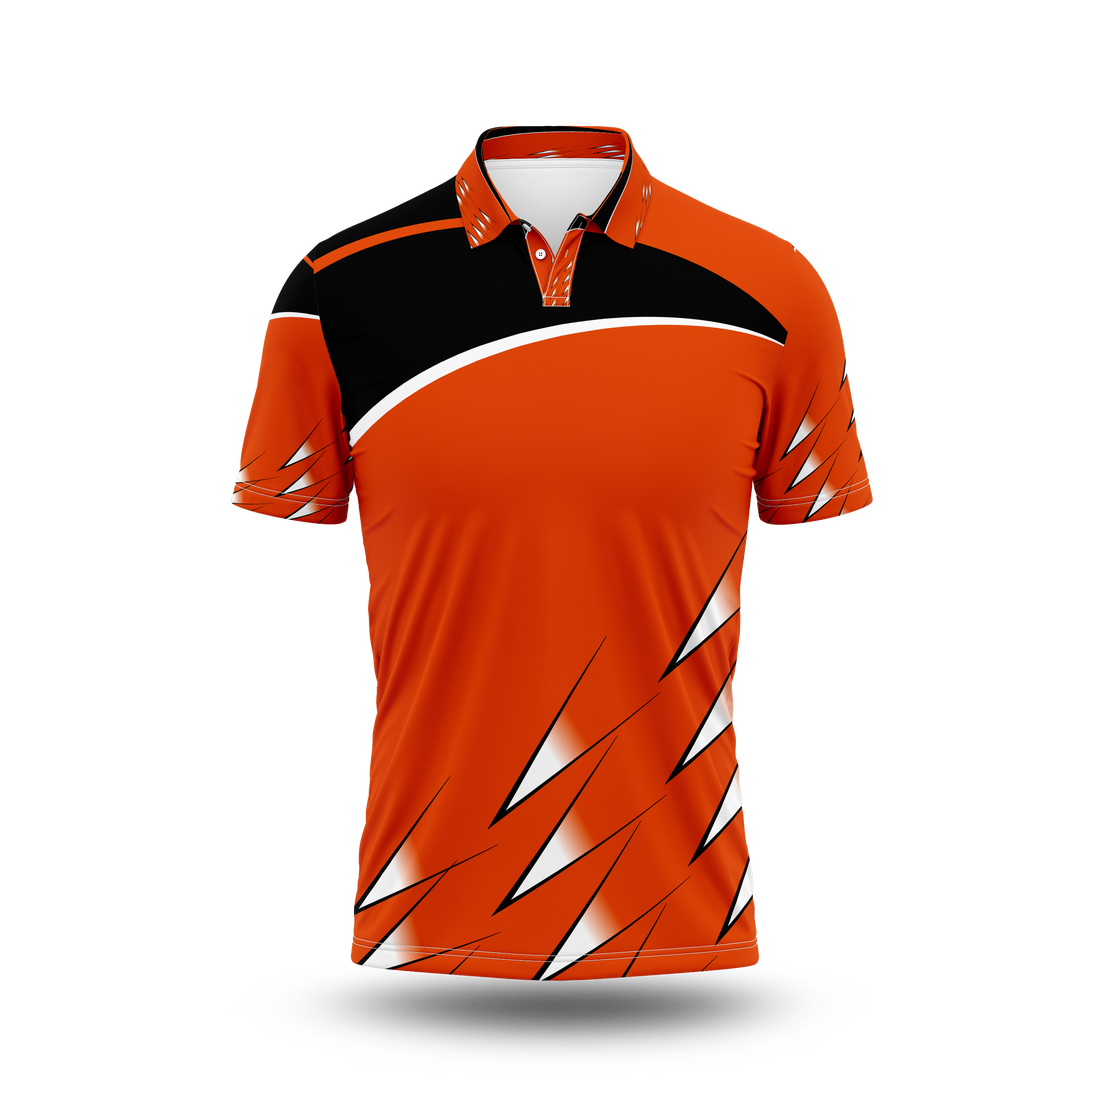 Next Print All Over Printed Sports Jersey.